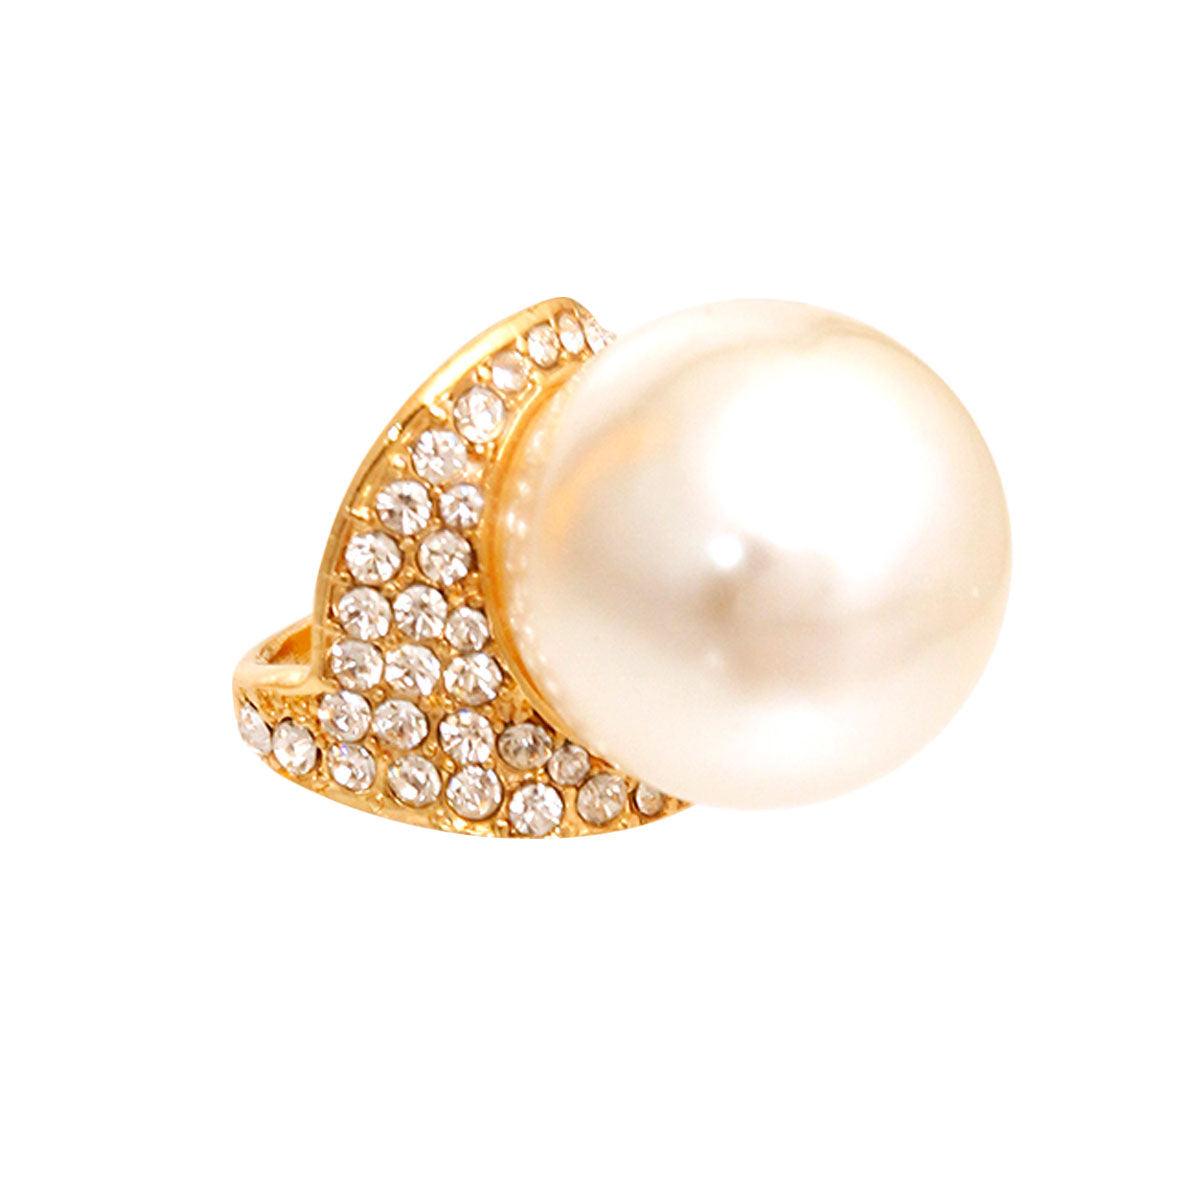 Stunning Faux Pearl & Rhinestone Ring - Perfect for Any Cocktail Event!